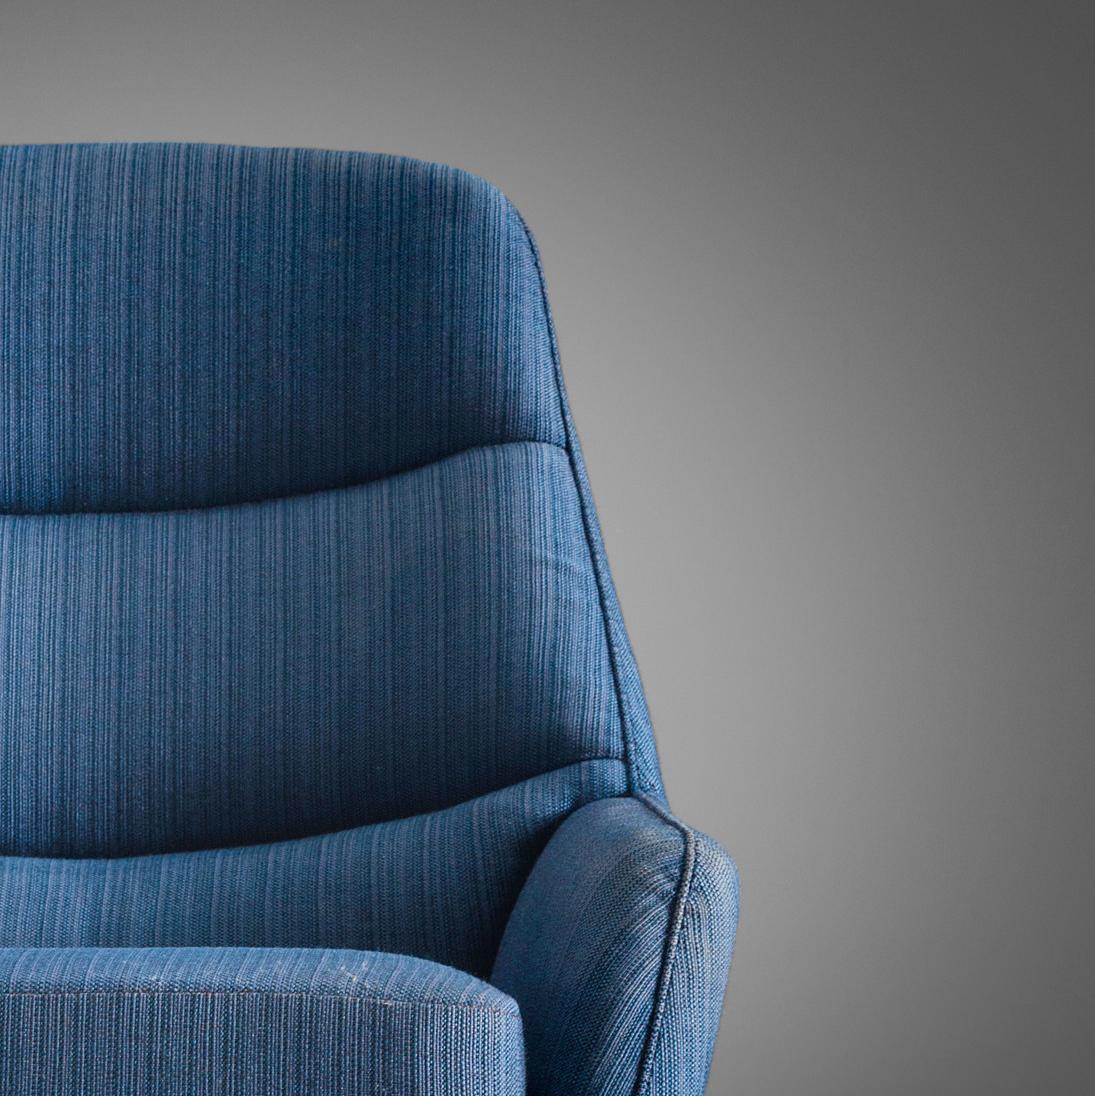 Mid-20th Century Illum Wikkelsø Lounge Chair in Blue Upholstery For Sale